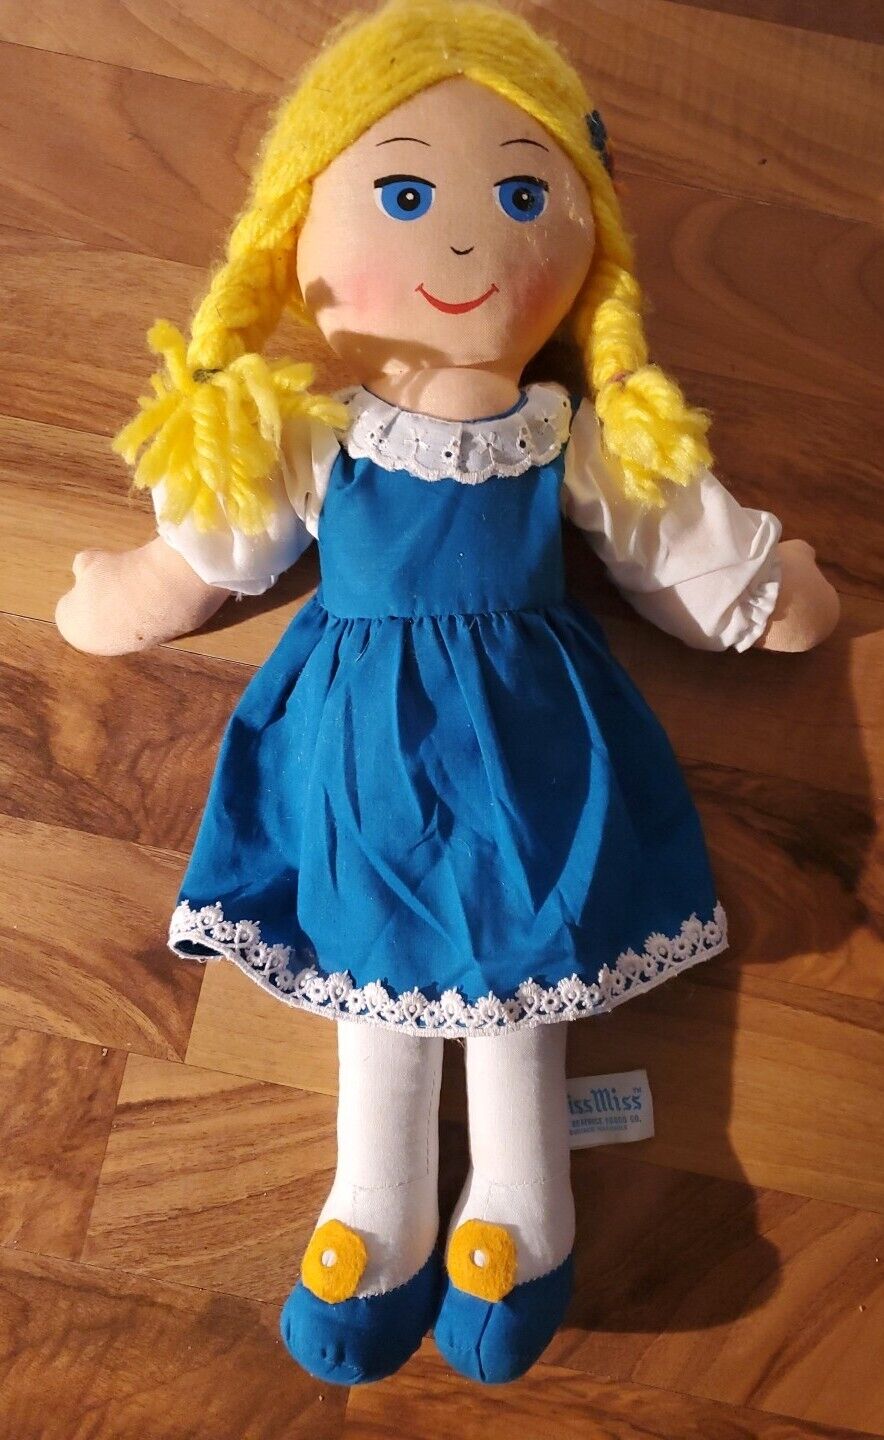 Vintage Swiss Miss Doll 1977 Beatrice Foods Co. 16” Hot Chocolate Plush